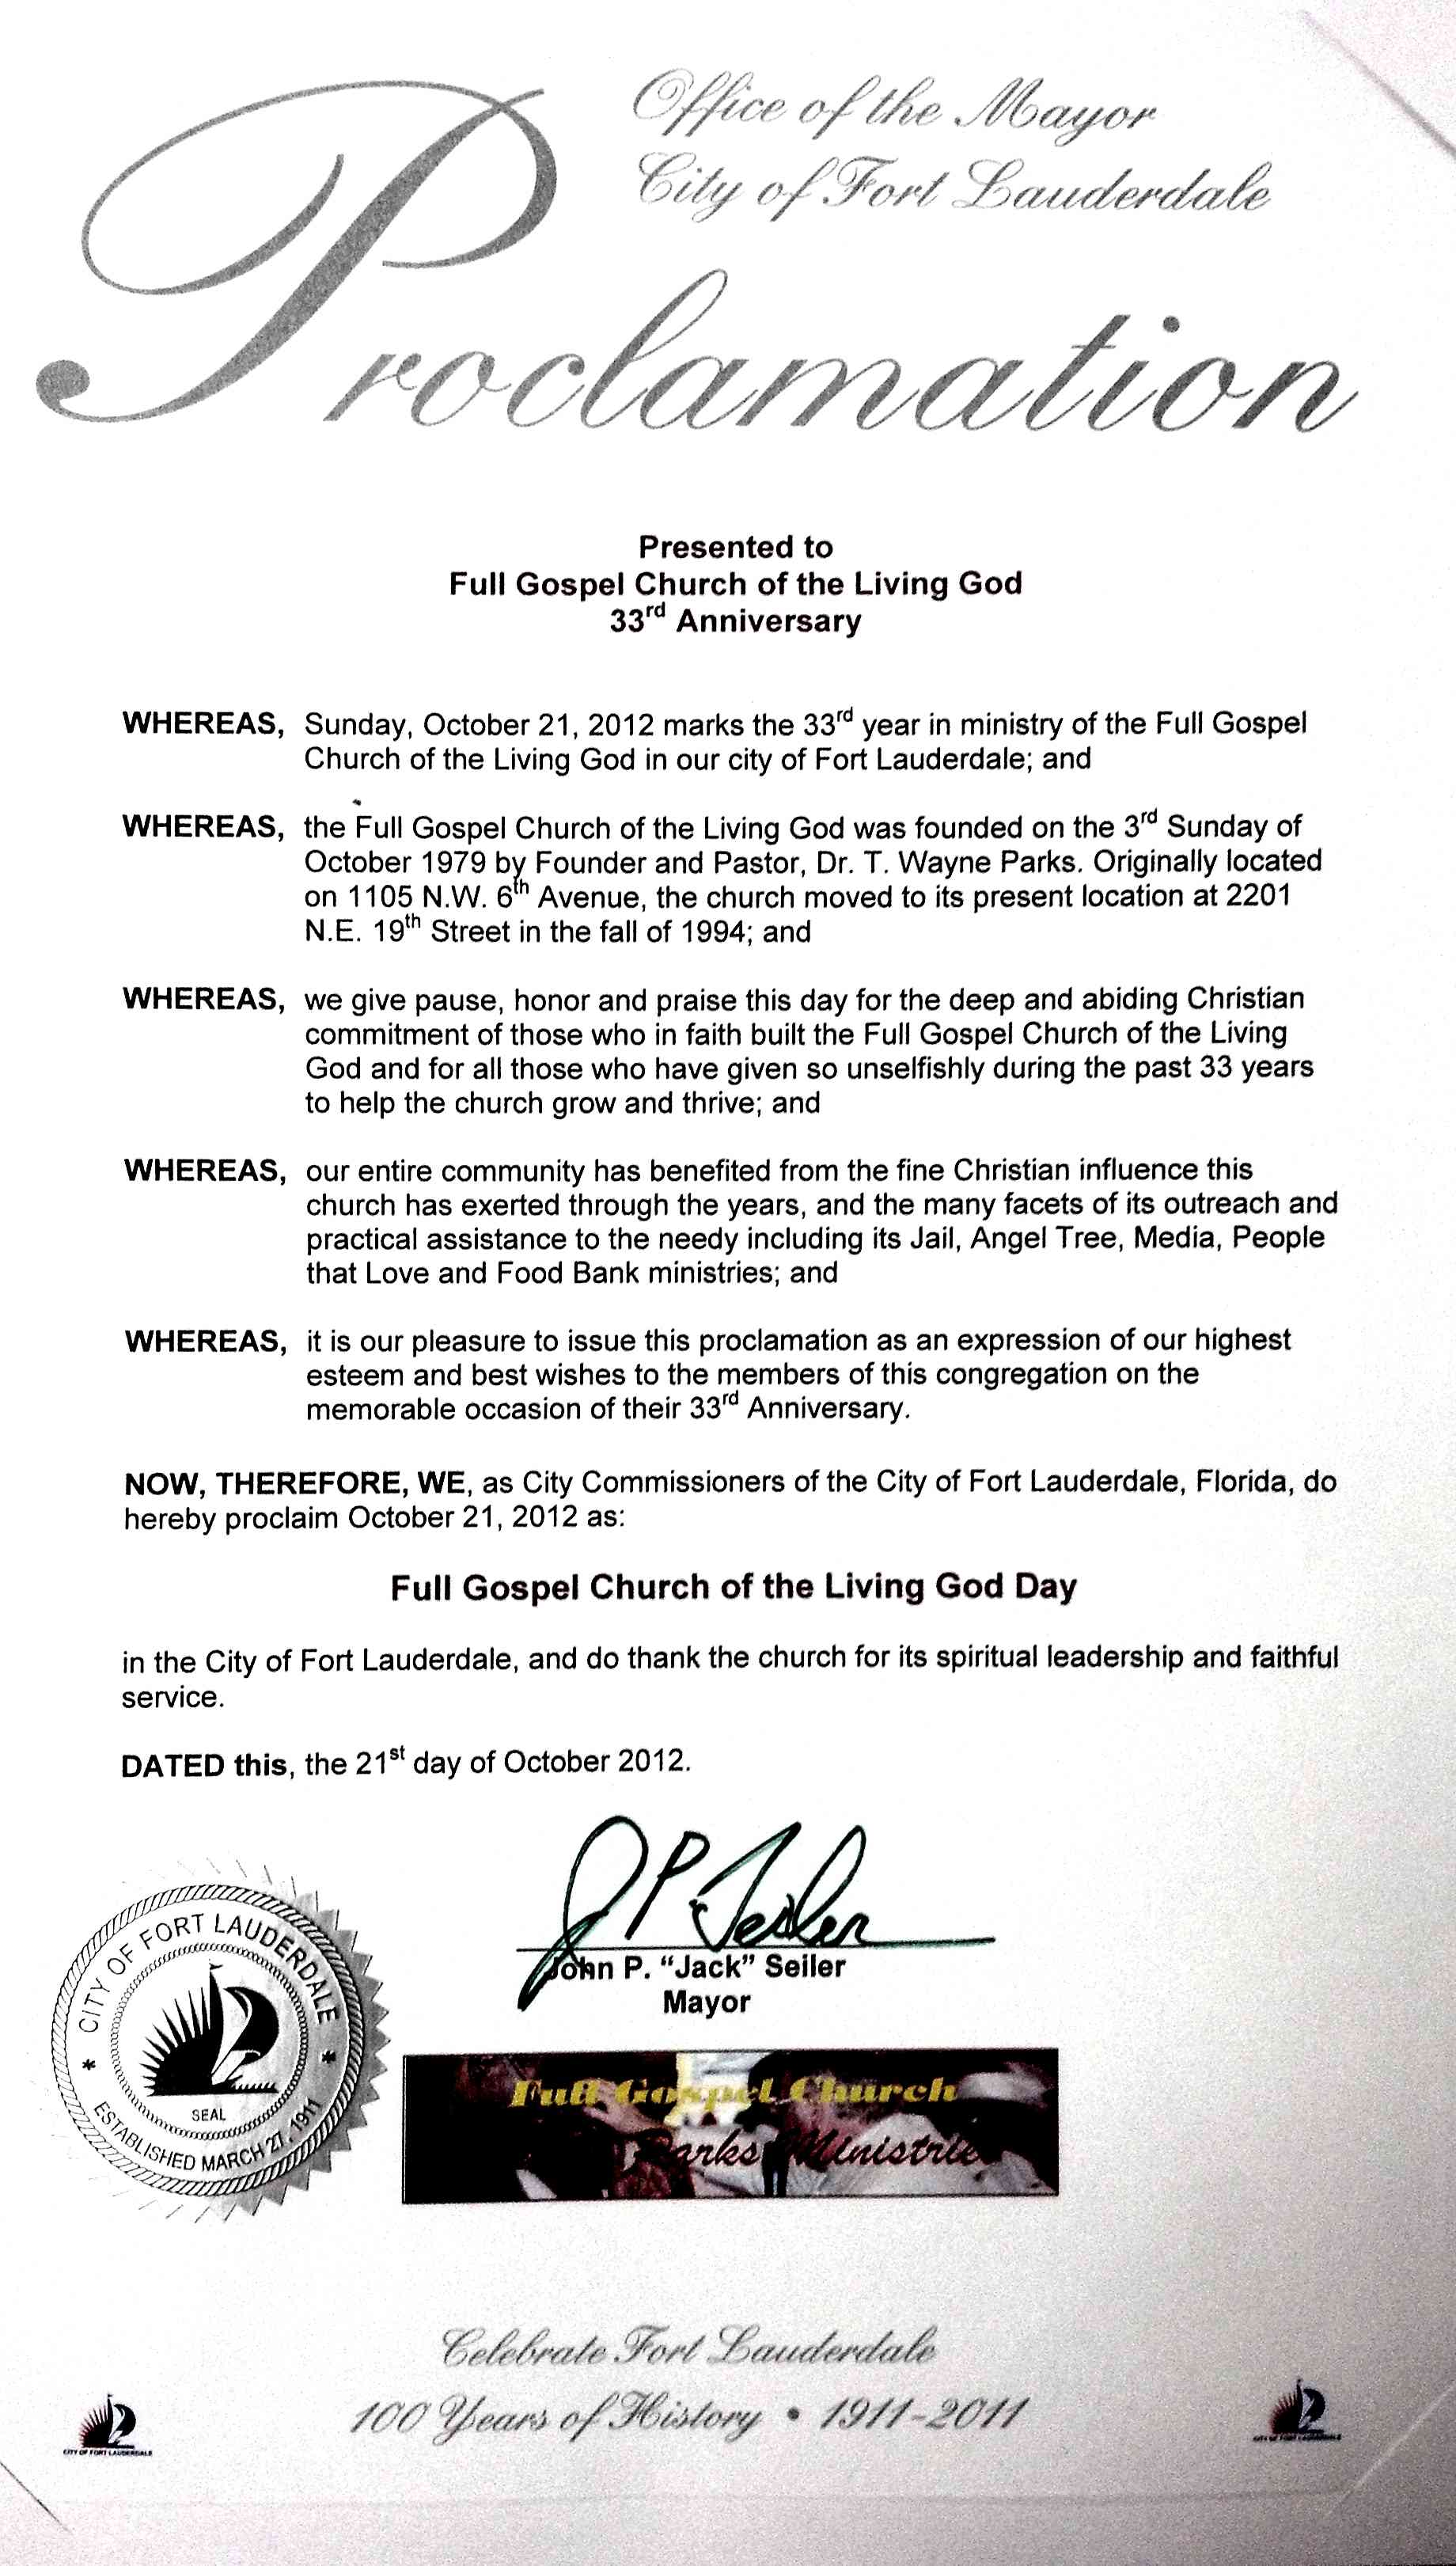 City of Fort Lauderdale Proclamation